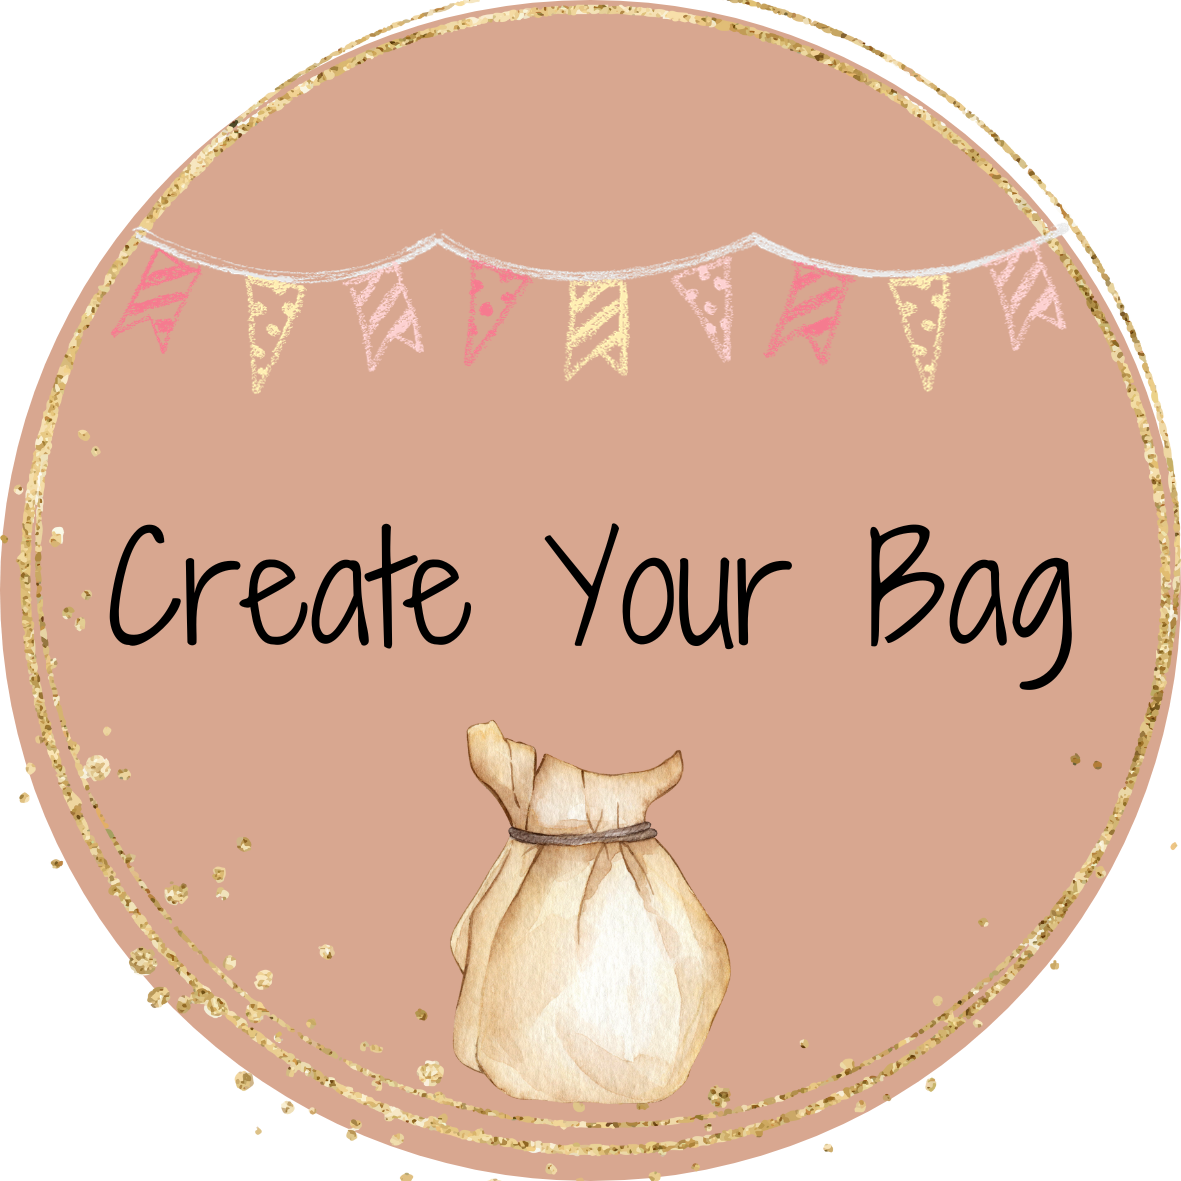 Create Your Bag